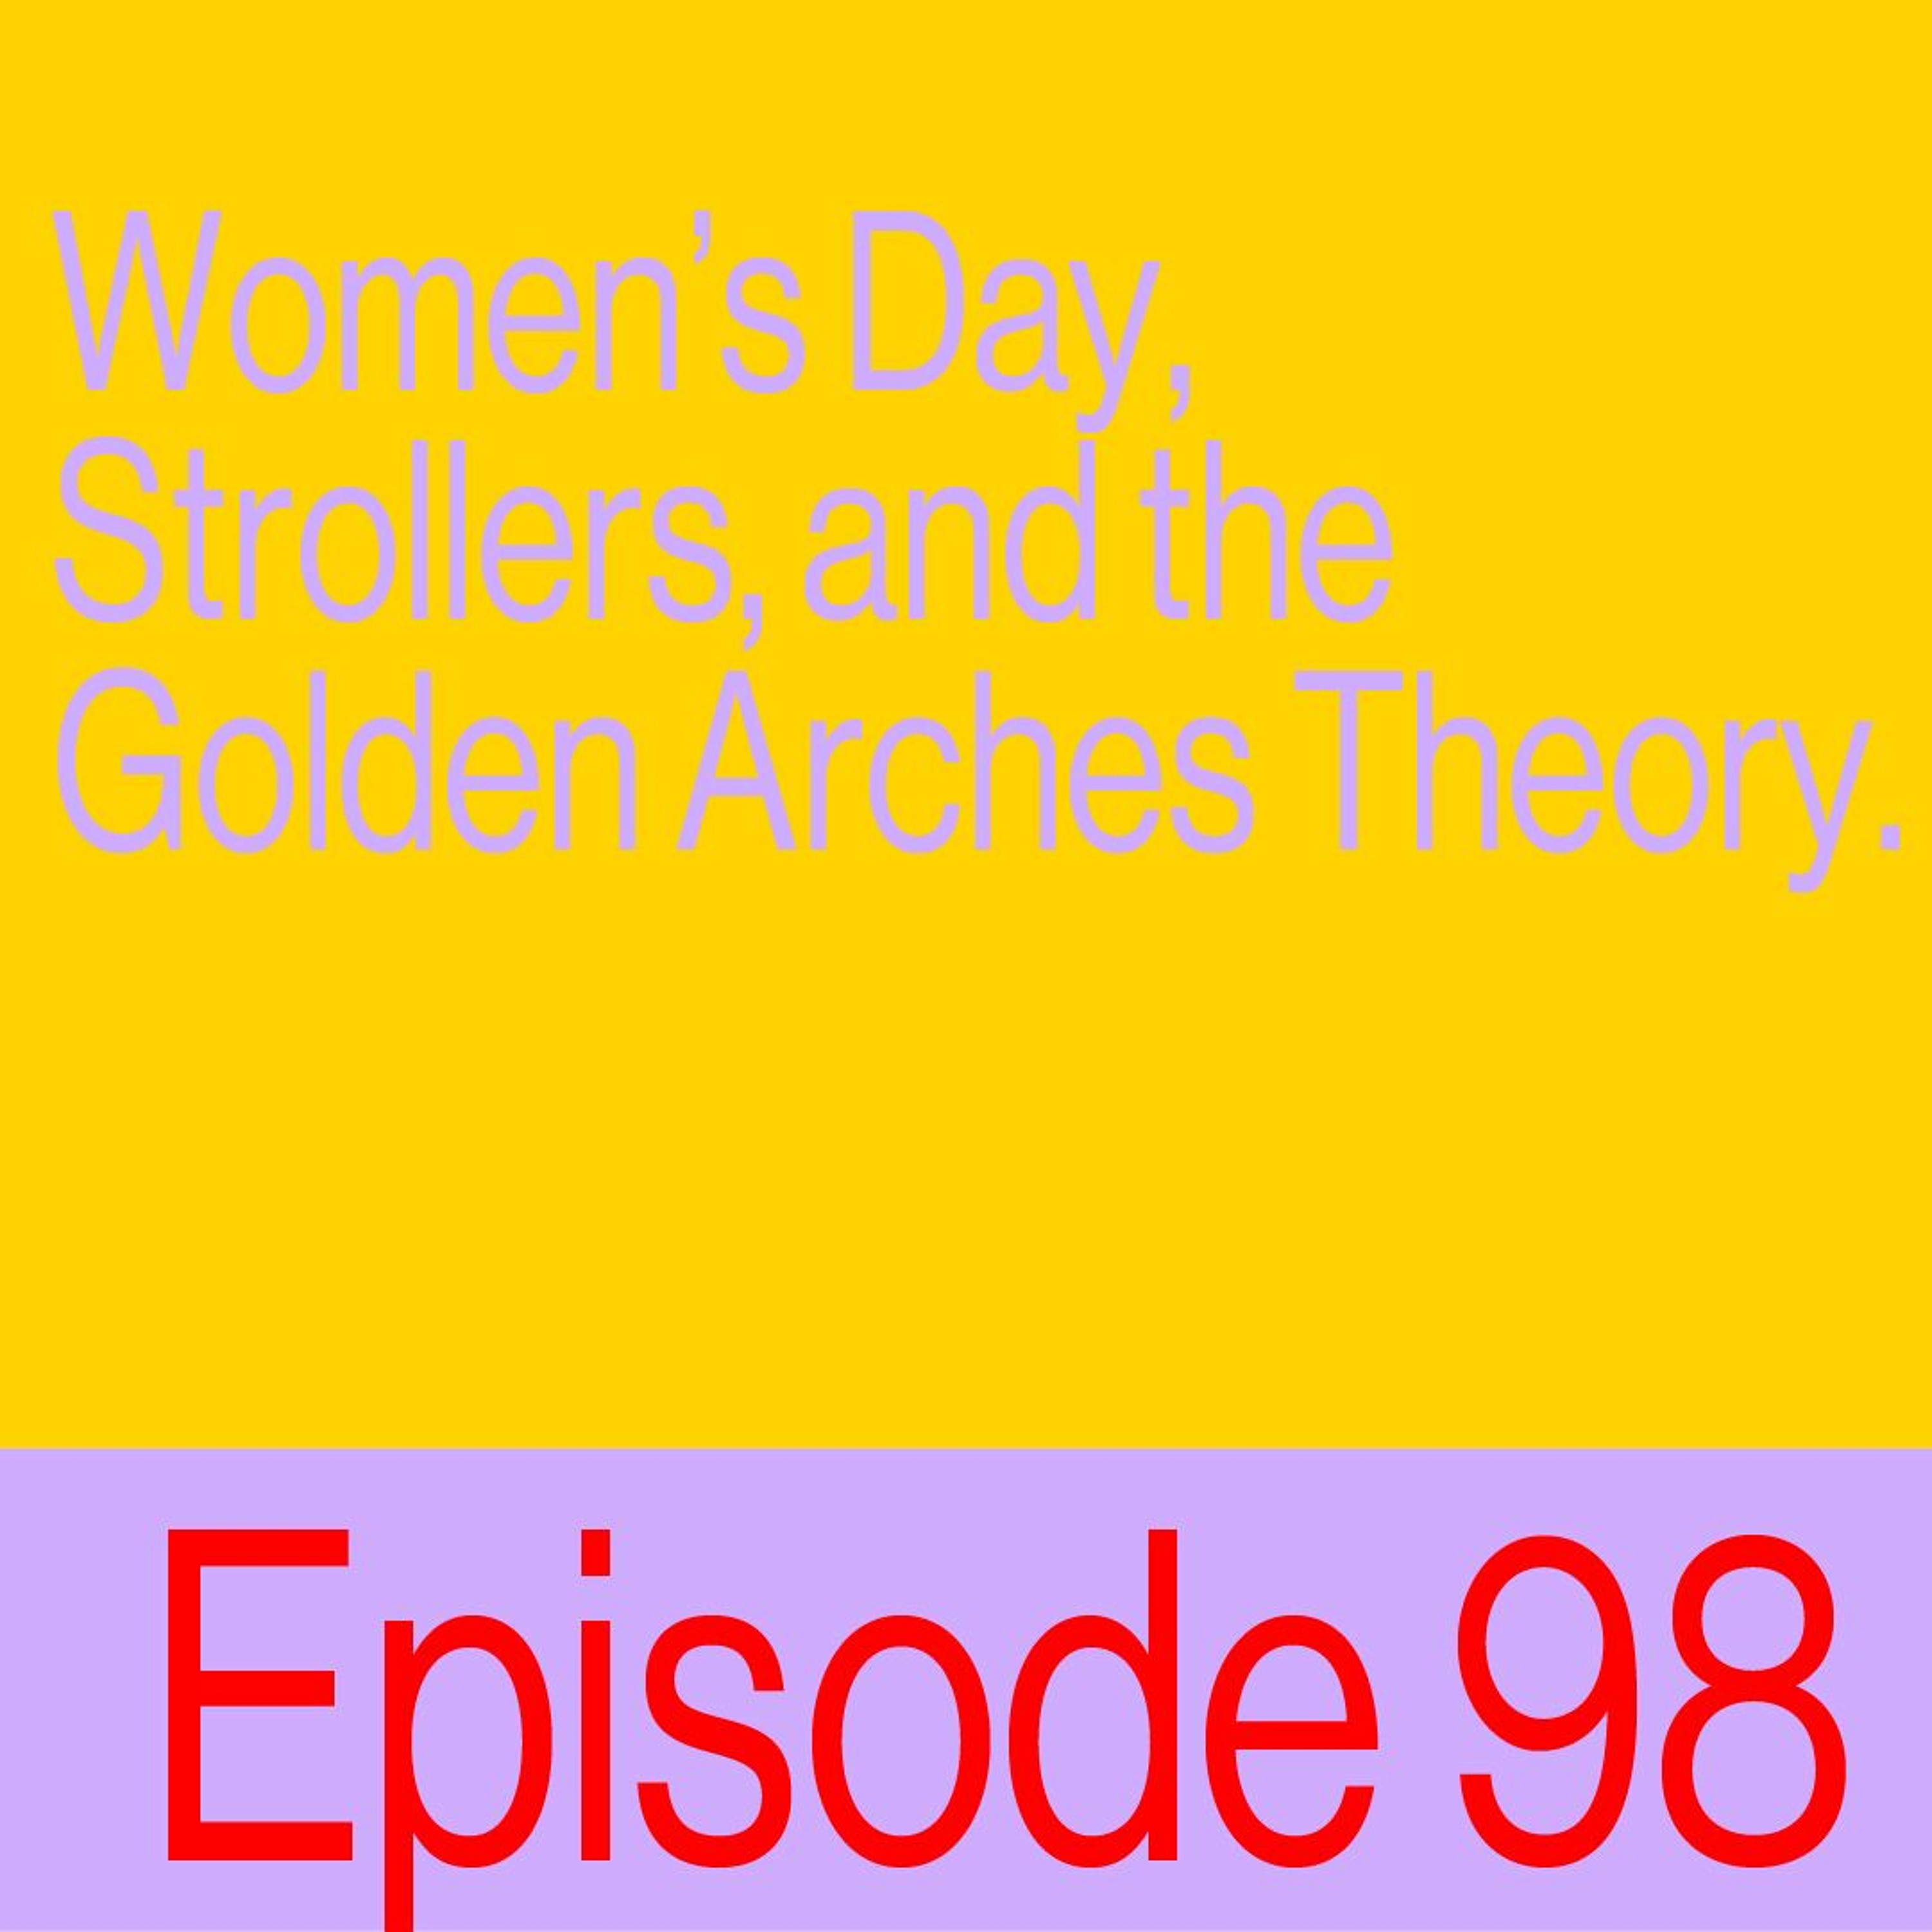 Episode 98: Women's Day, Strollers, and the Golden Arches Theory